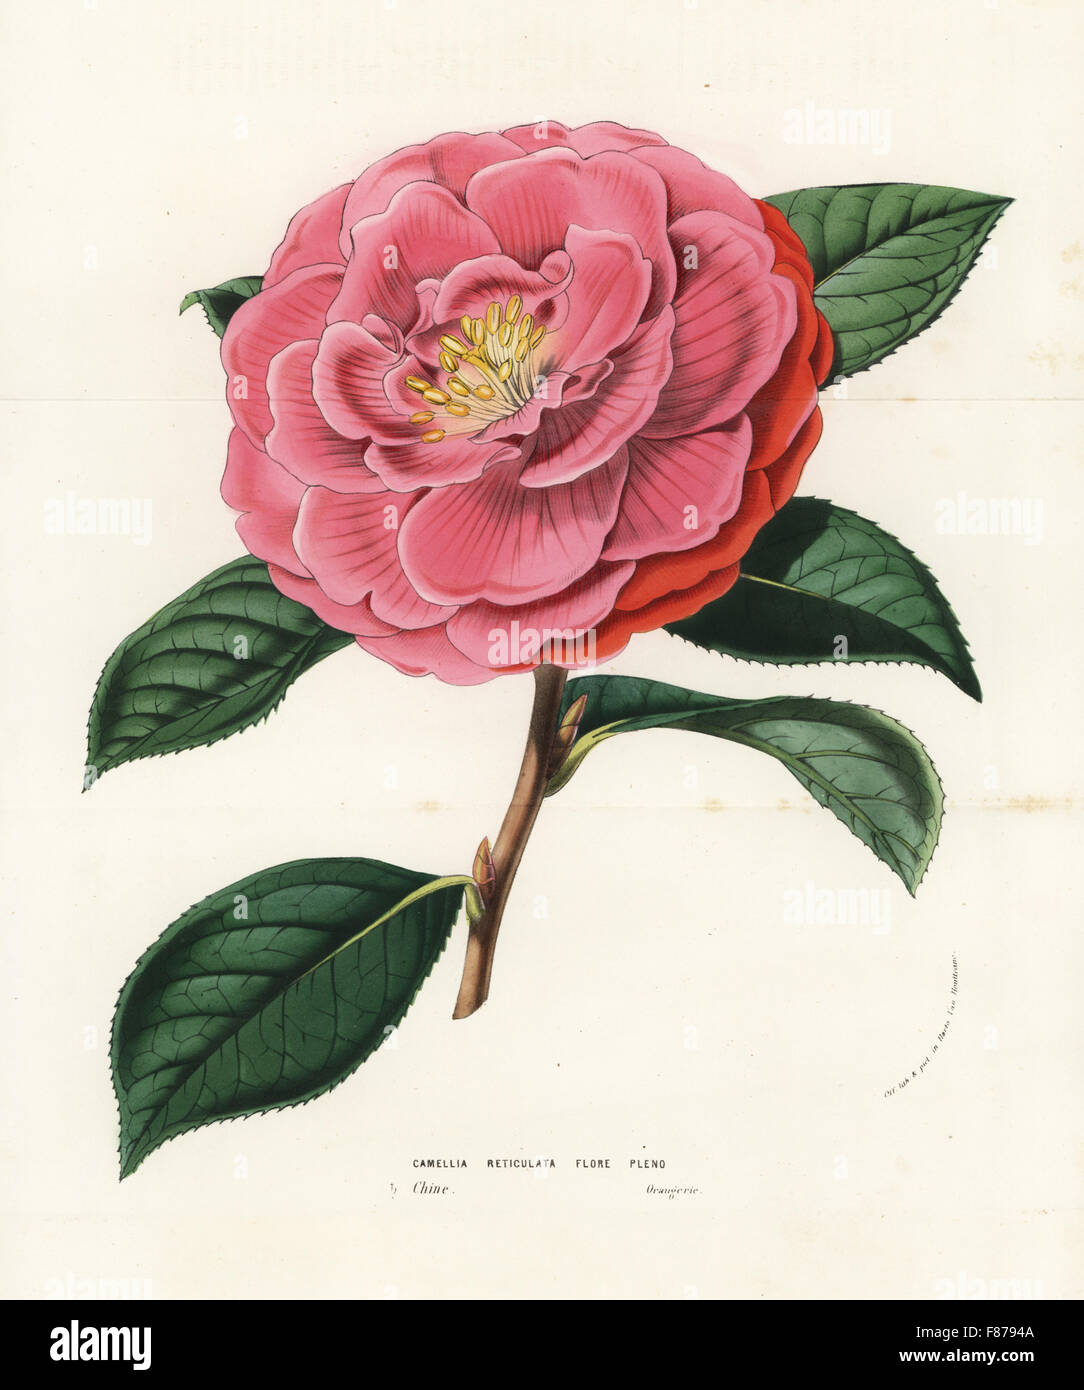 Camellia reticulata var. florepleno. Vulnerable. Handcoloured lithograph from Louis van Houtte and Charles Lemaire's Flowers of the Gardens and Hothouses of Europe, Flore des Serres et des Jardins de l'Europe, Ghent, Belgium, 1857. Stock Photo